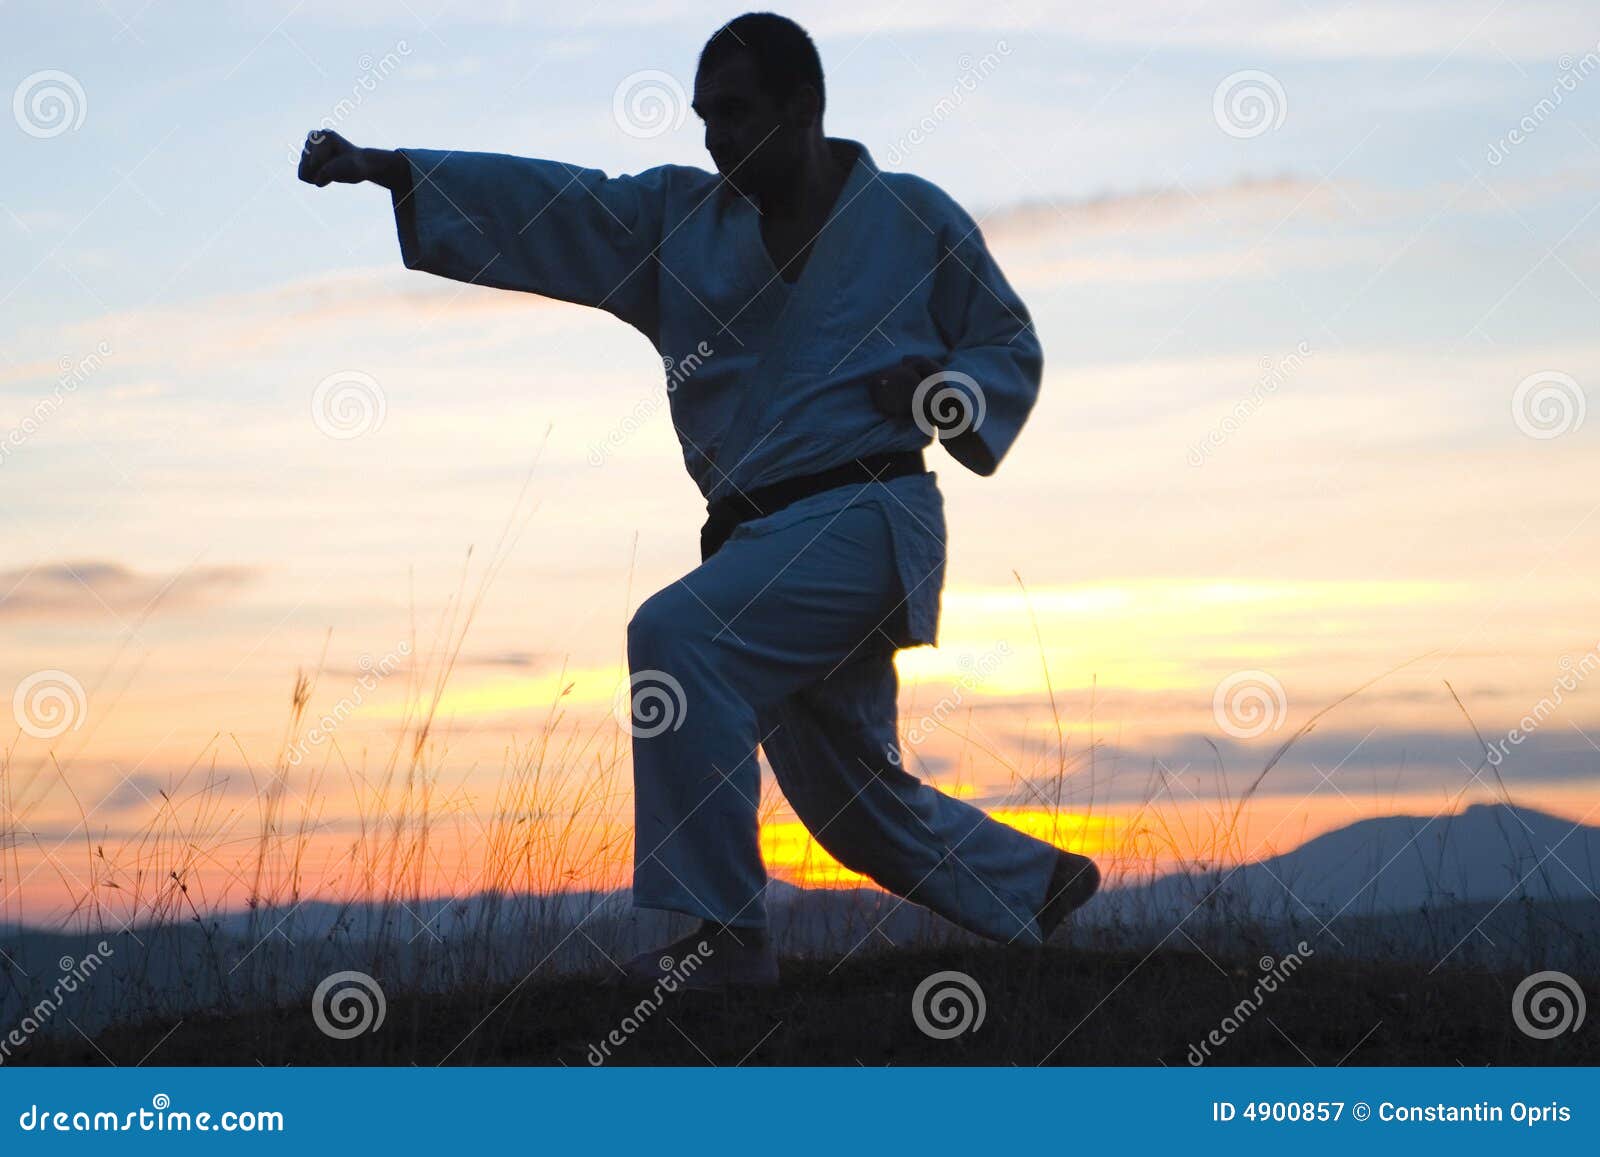 Fighter silhouette stock image. Image of sport, nature - 4900857